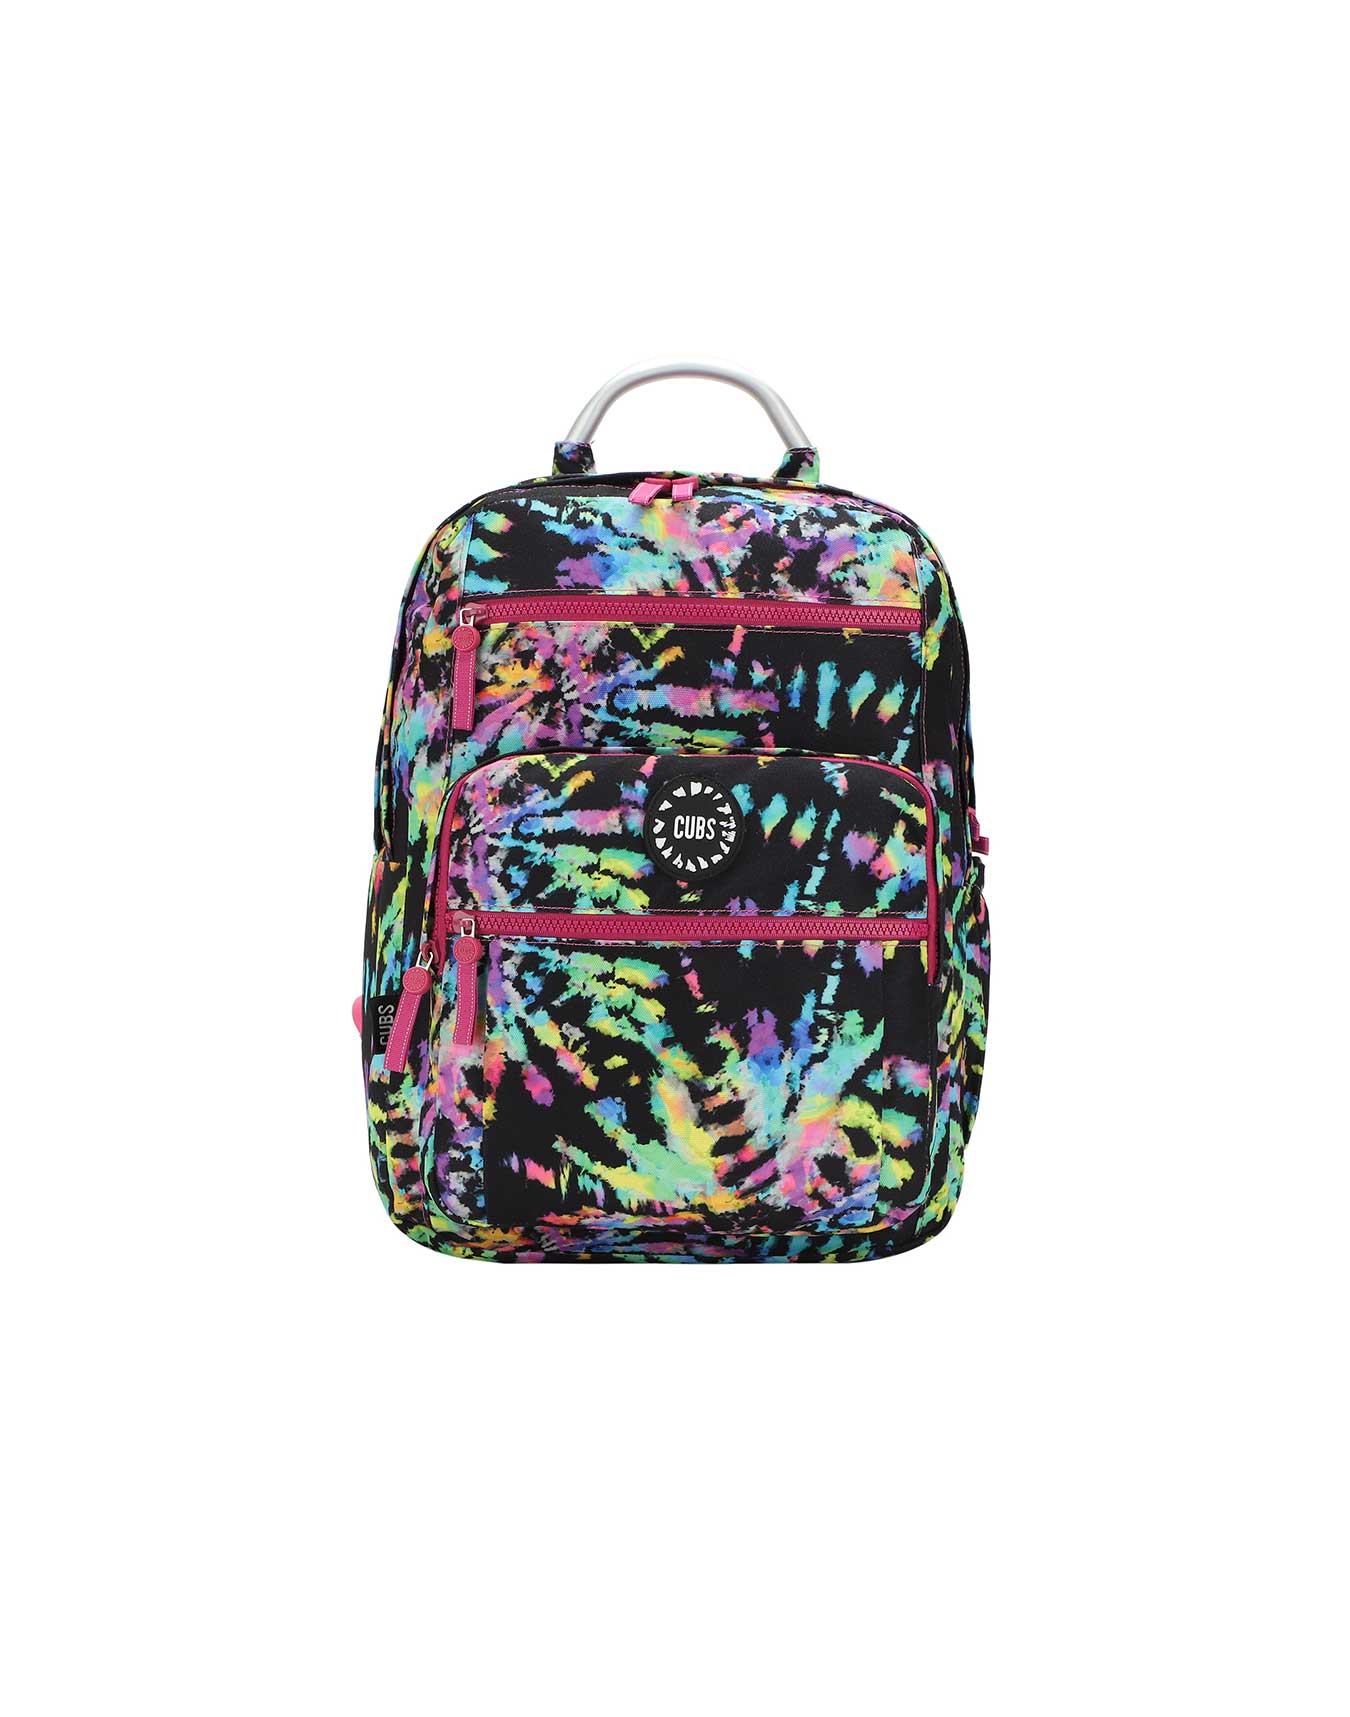 VICTORIAS SECRET MINI BACKPACK NEON YELLOW SMALL CITY PHITON COLLECTION  SCHOOL BAG: Buy Online at Best Price in UAE - Amazon.ae